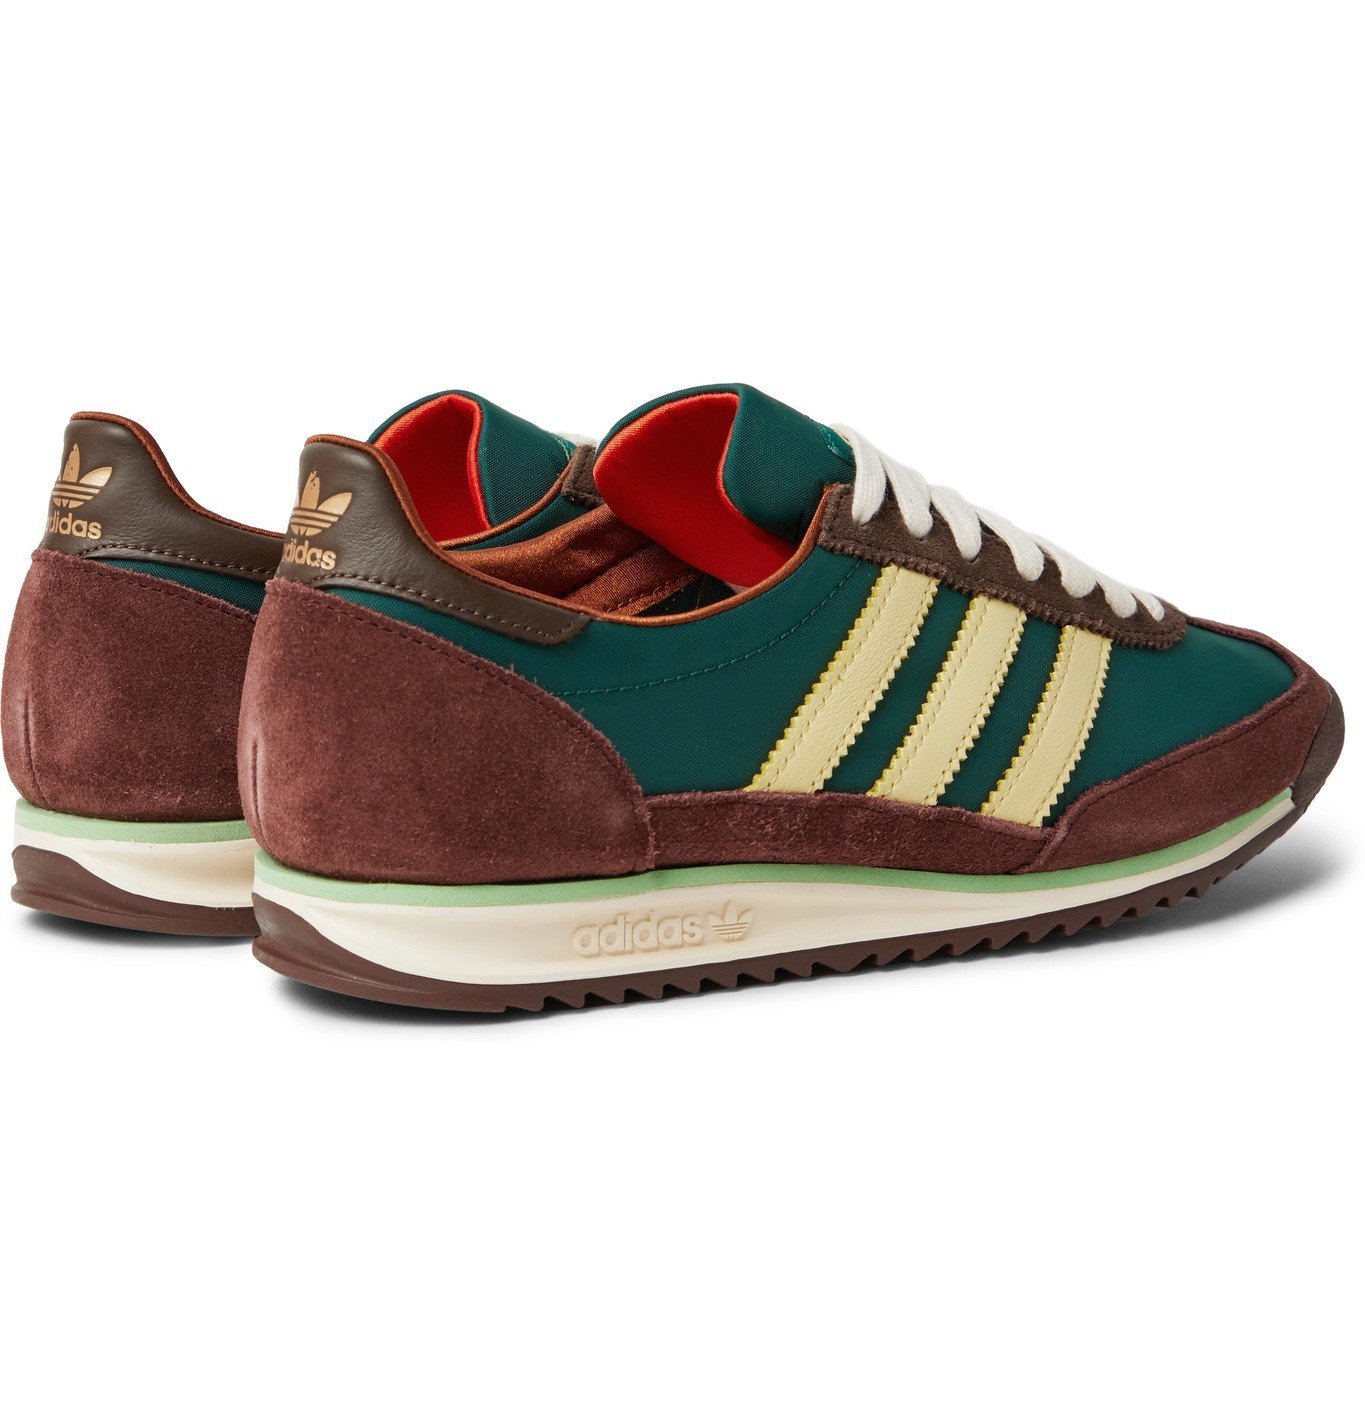 adidas Consortium - Wales Bonner SL72 Shell, Leather and Suede Sneakers